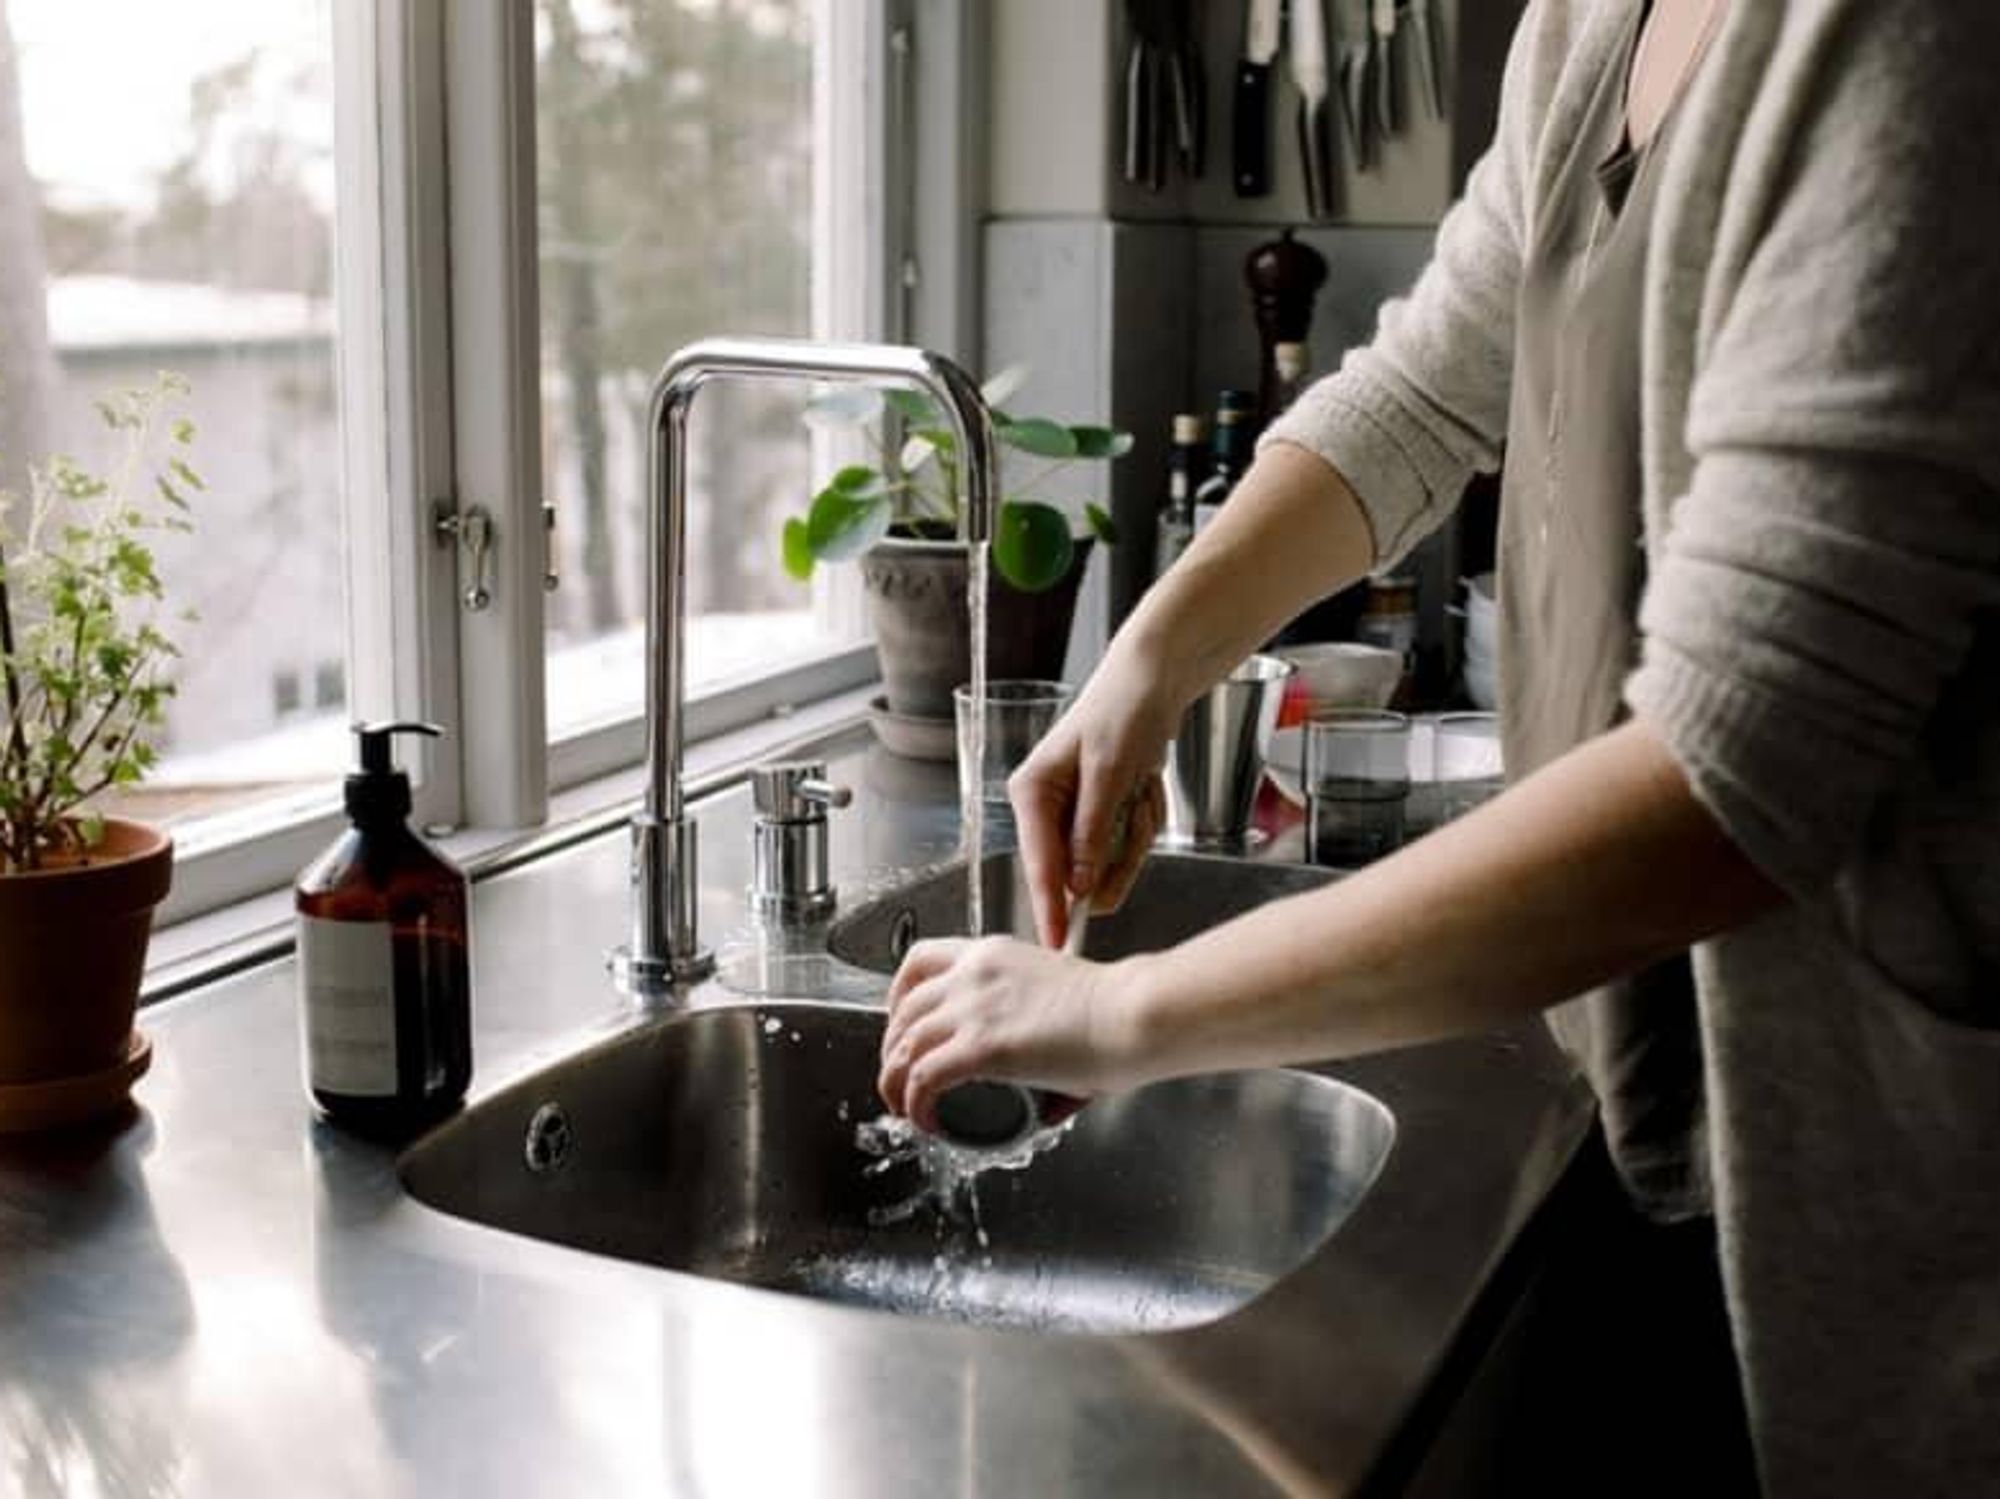 https://houston.culturemap.com/media-library/woman-washing-dishes-in-the-sink.jpg?id=31502439&width=2000&height=1500&quality=85&coordinates=110%2C0%2C111%2C0